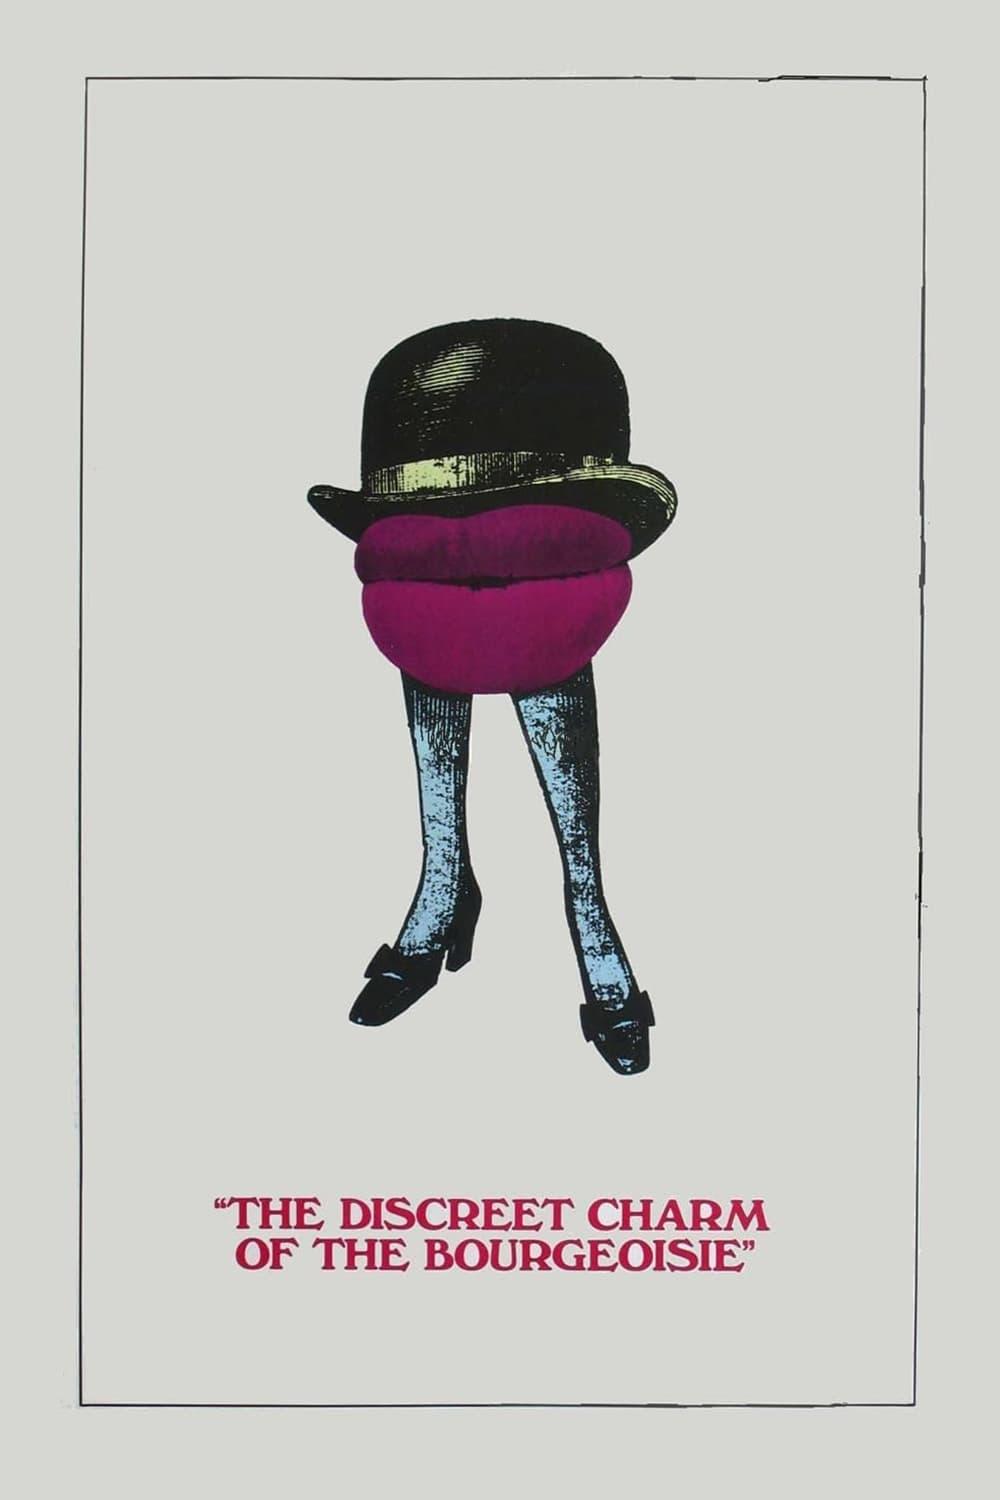 The Discreet Charm of the Bourgeoisie poster